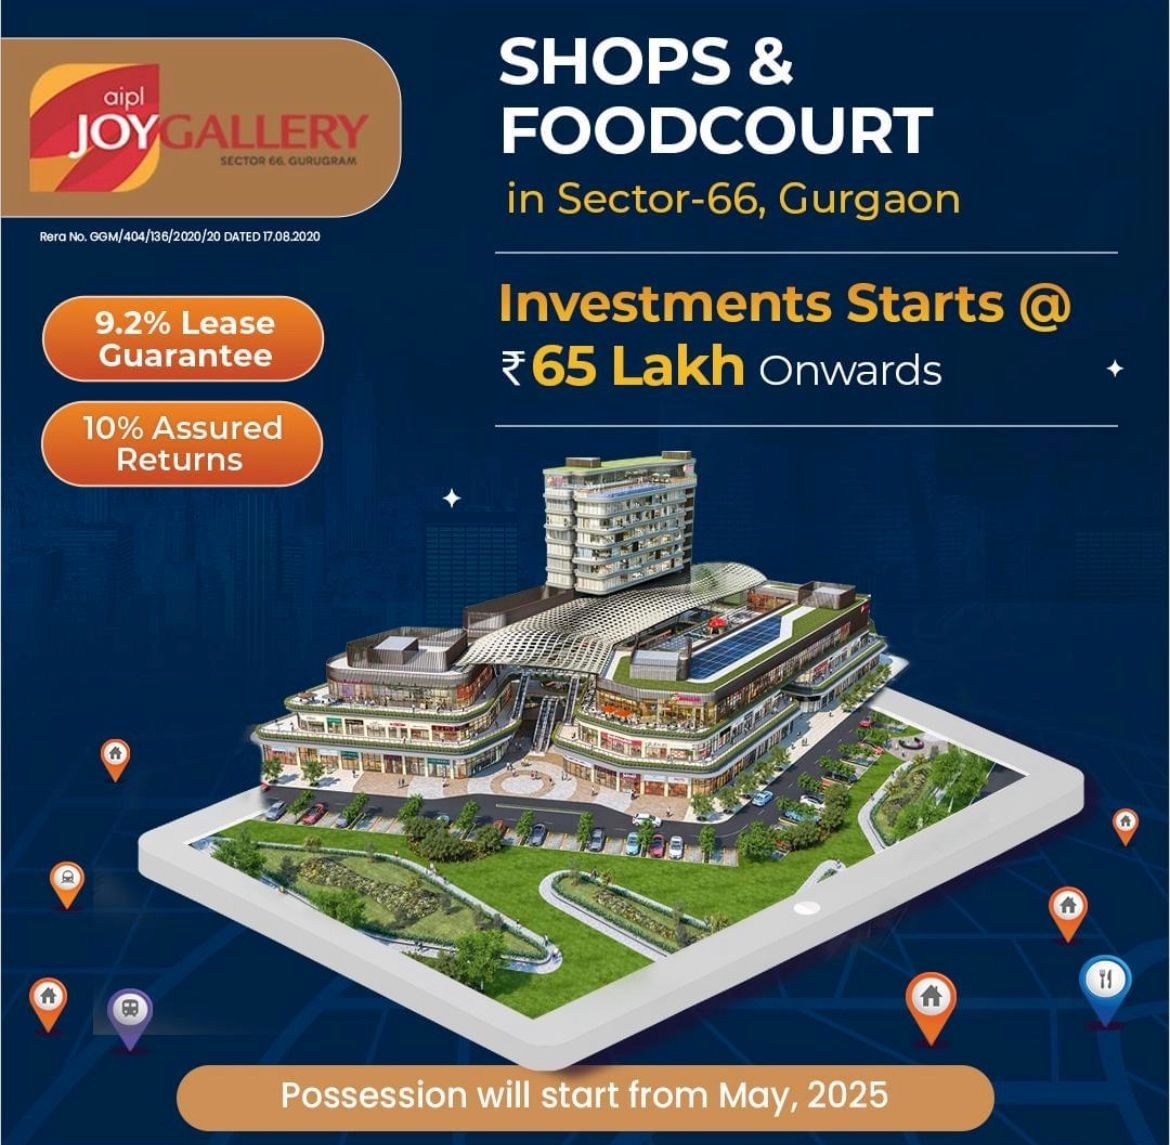 Possession will start form May 2025 at AIPL Joy Gallery in Sector 66, Gurgaon Update